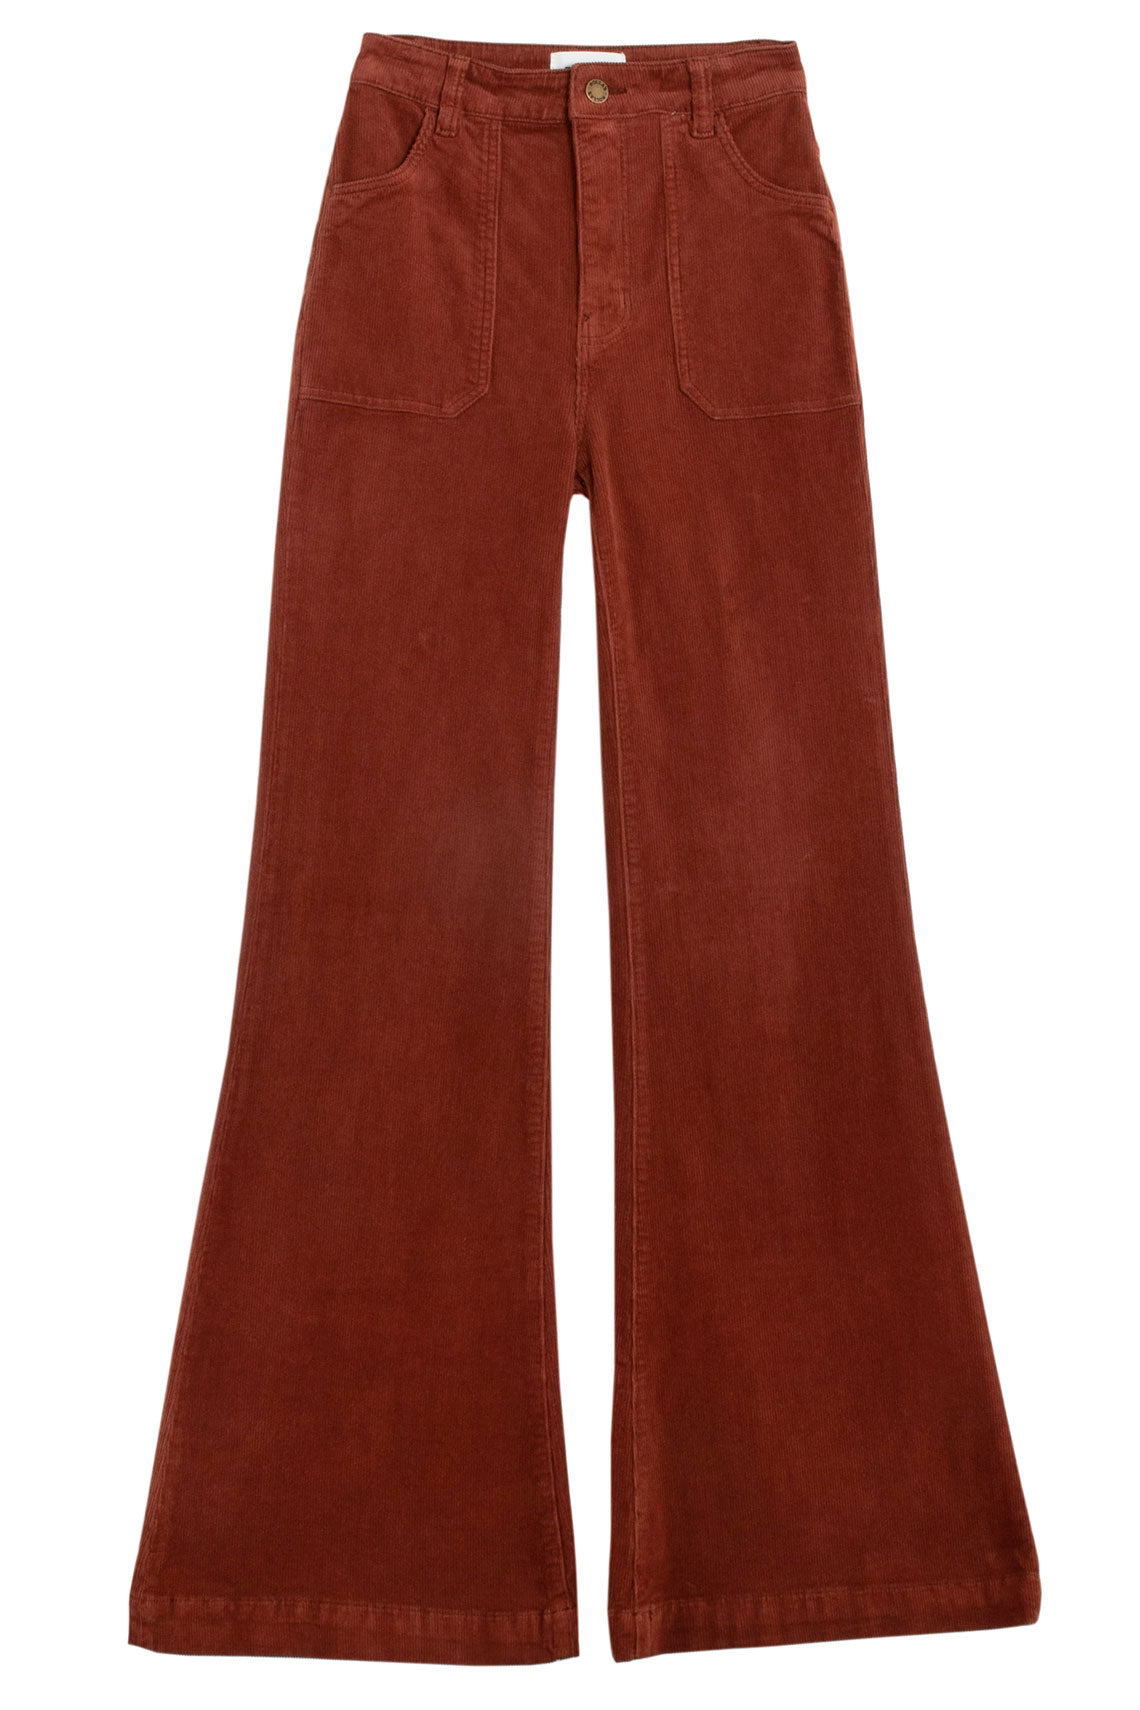 Rolla's Jeans Eastcoast Flare Cord Chestnut — Meadow Collective